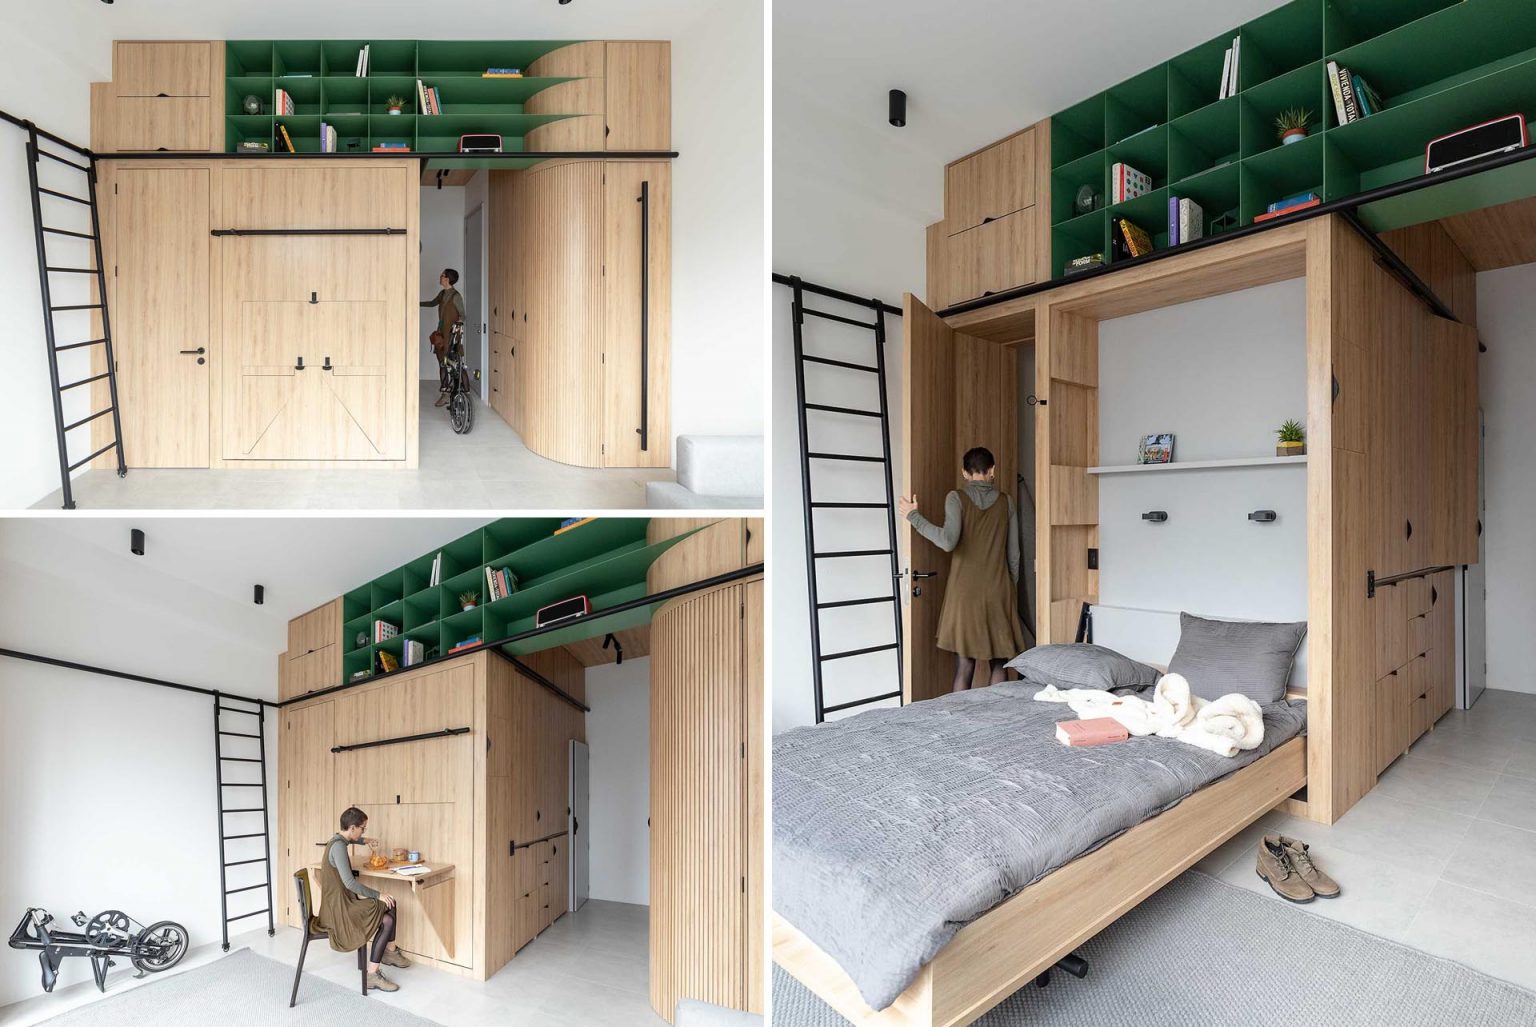 Design a wardrobe to help make the most of the space in a small apartment - Photo 1.